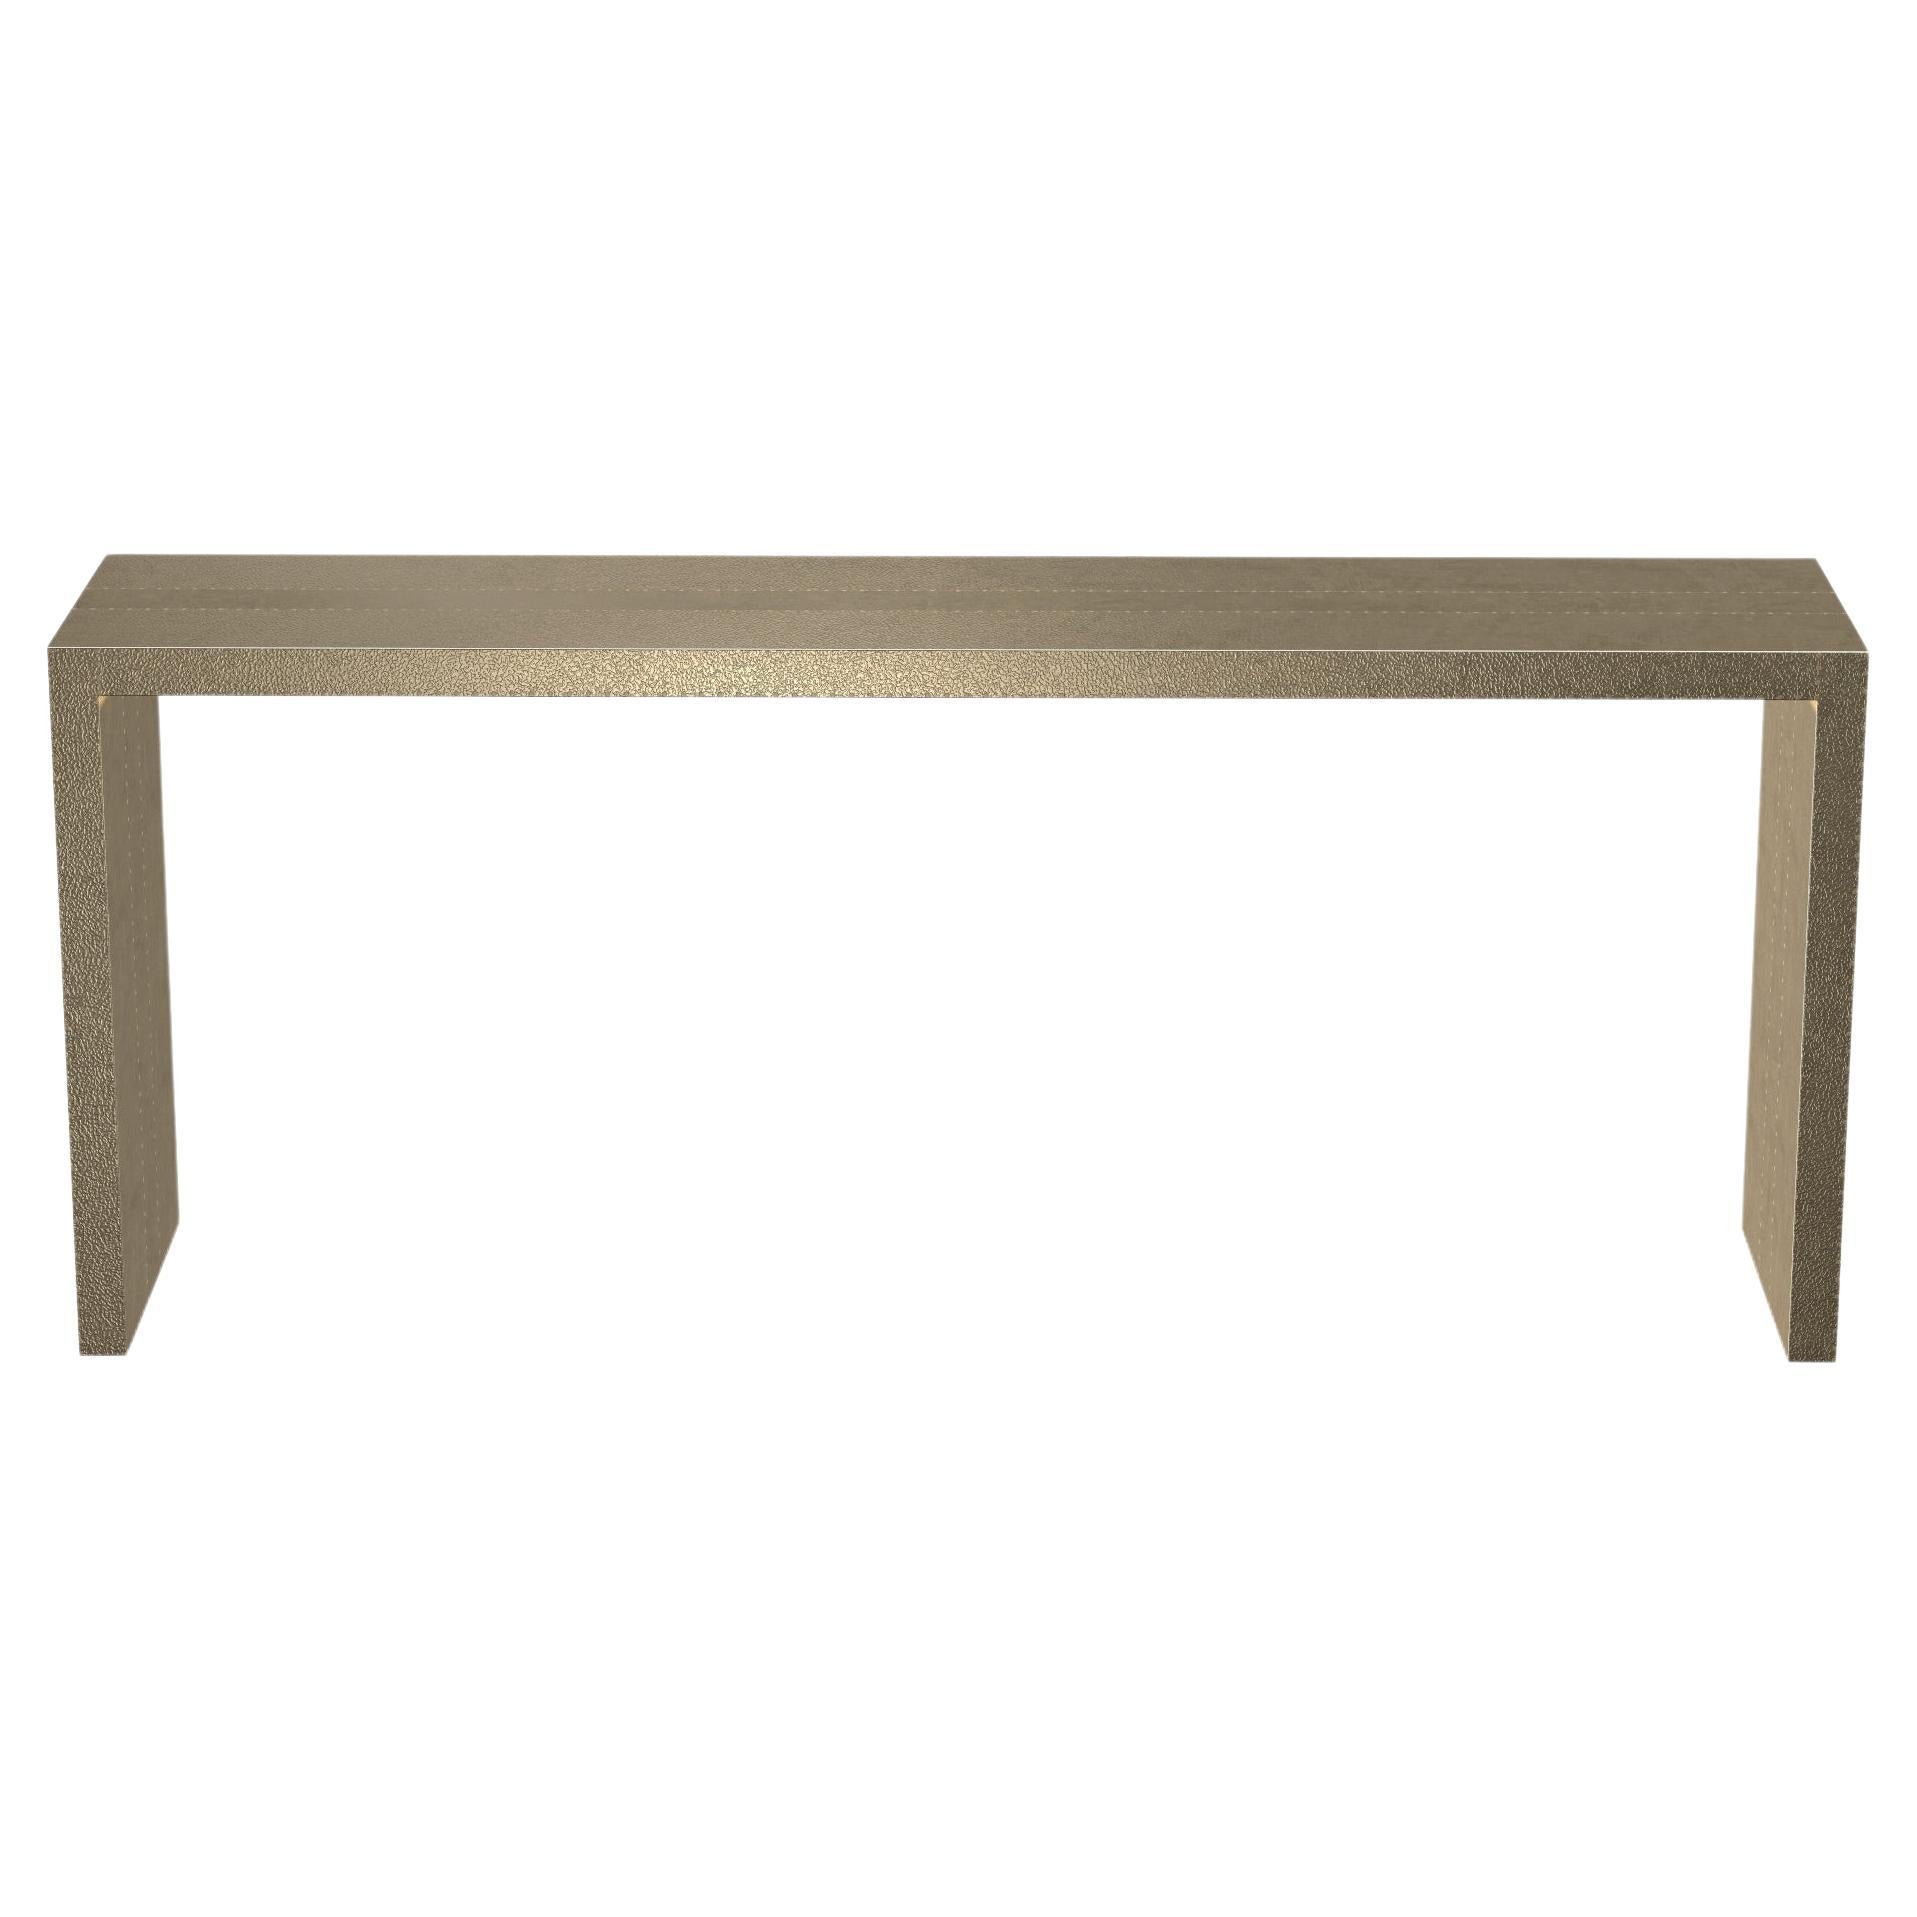 Art Deco Desks and Writing Console Tables in Fine Hammered Brass by Alison Spear For Sale